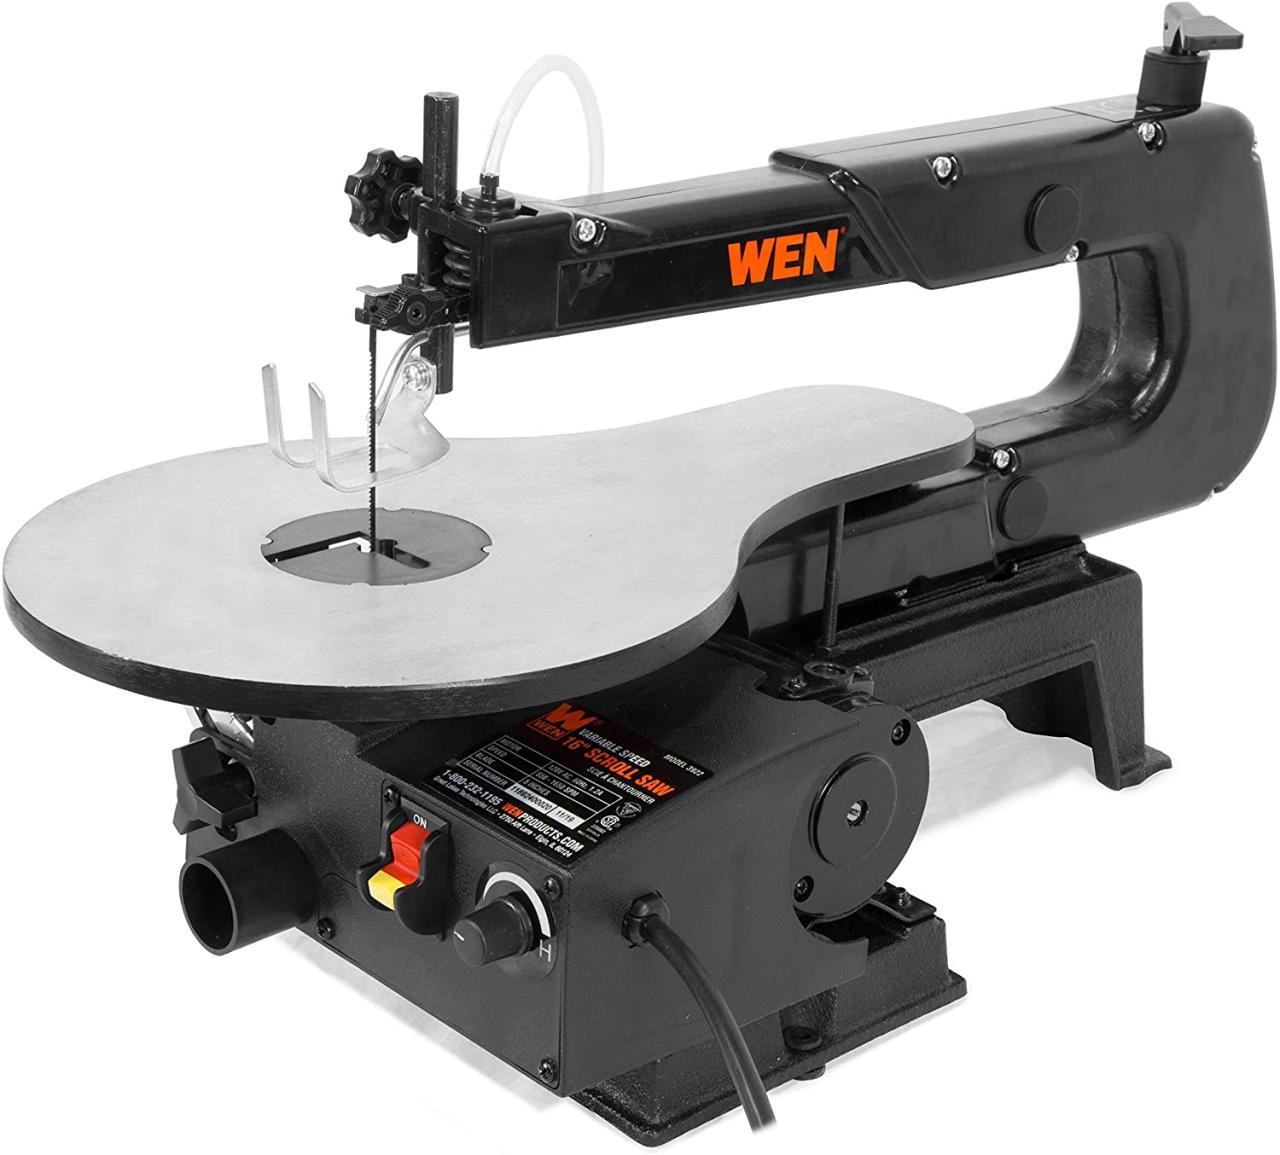 Buy WEN 3922 16-inch Variable Speed Scroll Saw with Easy-Access Blade  Changes Online in Vietnam. B084LKTV6Y